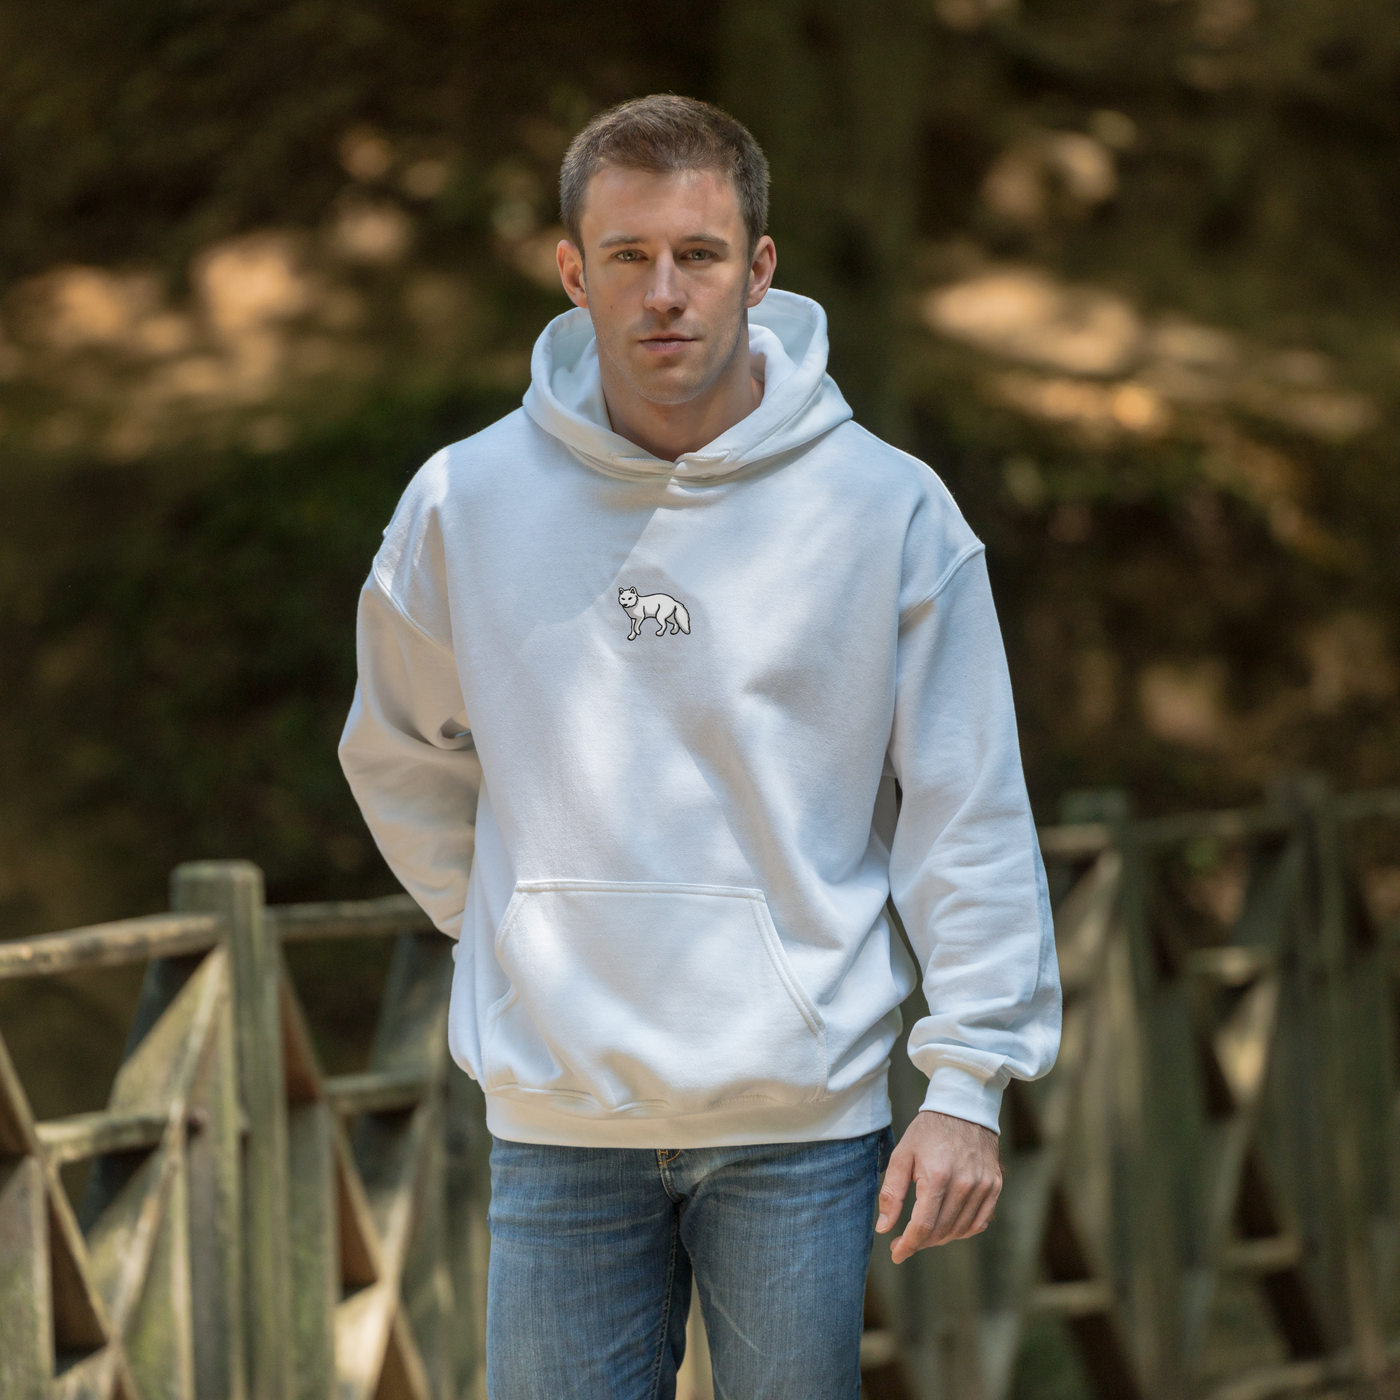 Bobby's Planet Men's Embroidered Arctic Fox Hoodie from Arctic Polar Animals Collection in White Color#color_white